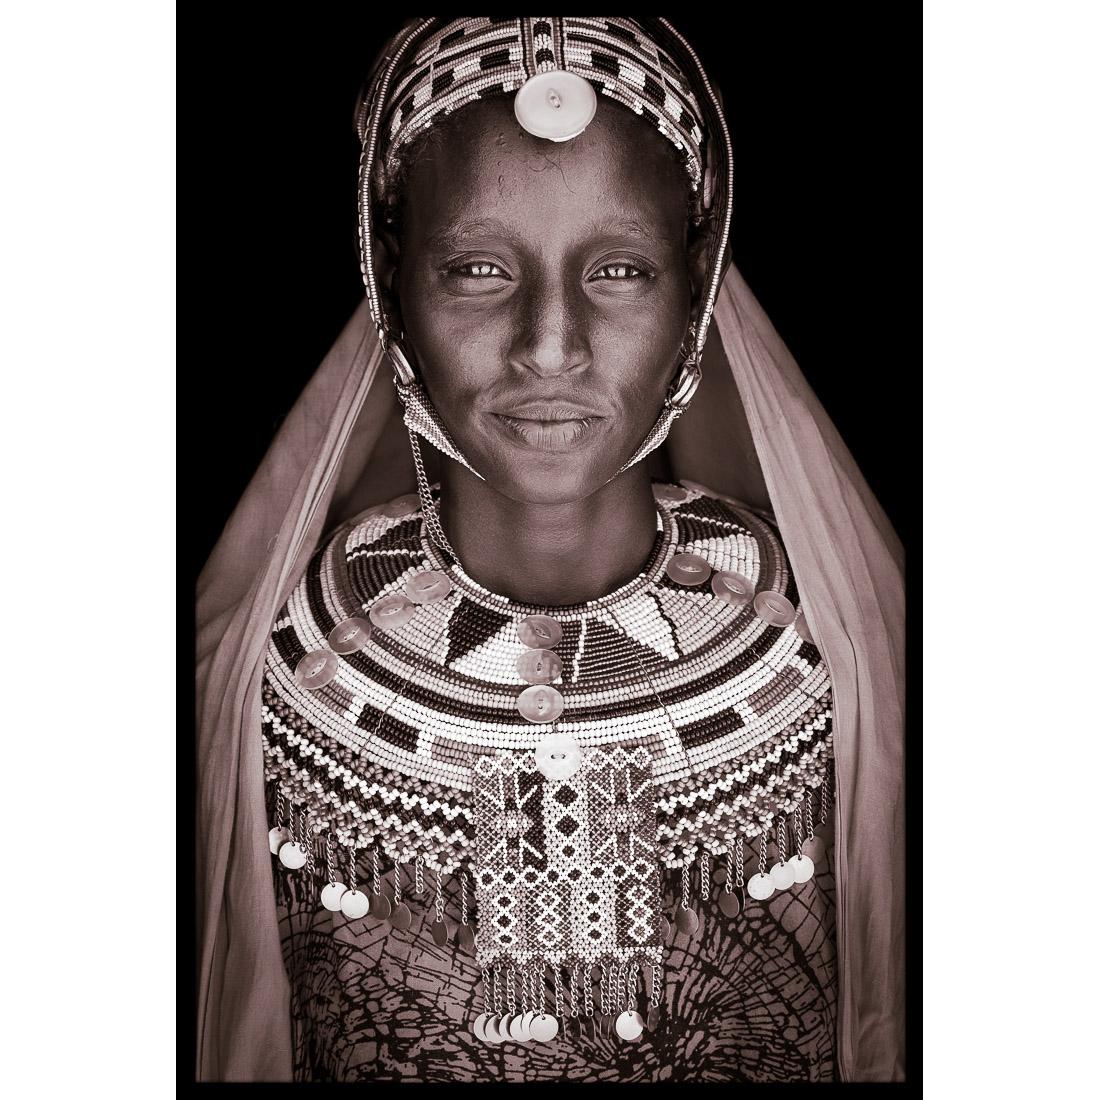 A portrait of Merayun, a Rendille woman from northern Kenya in 2019.

John Kenny’s work is all shot on location in some of the remotest corners of Africa. His images are all taken with natural light and his subjects in their day to day attire.

The